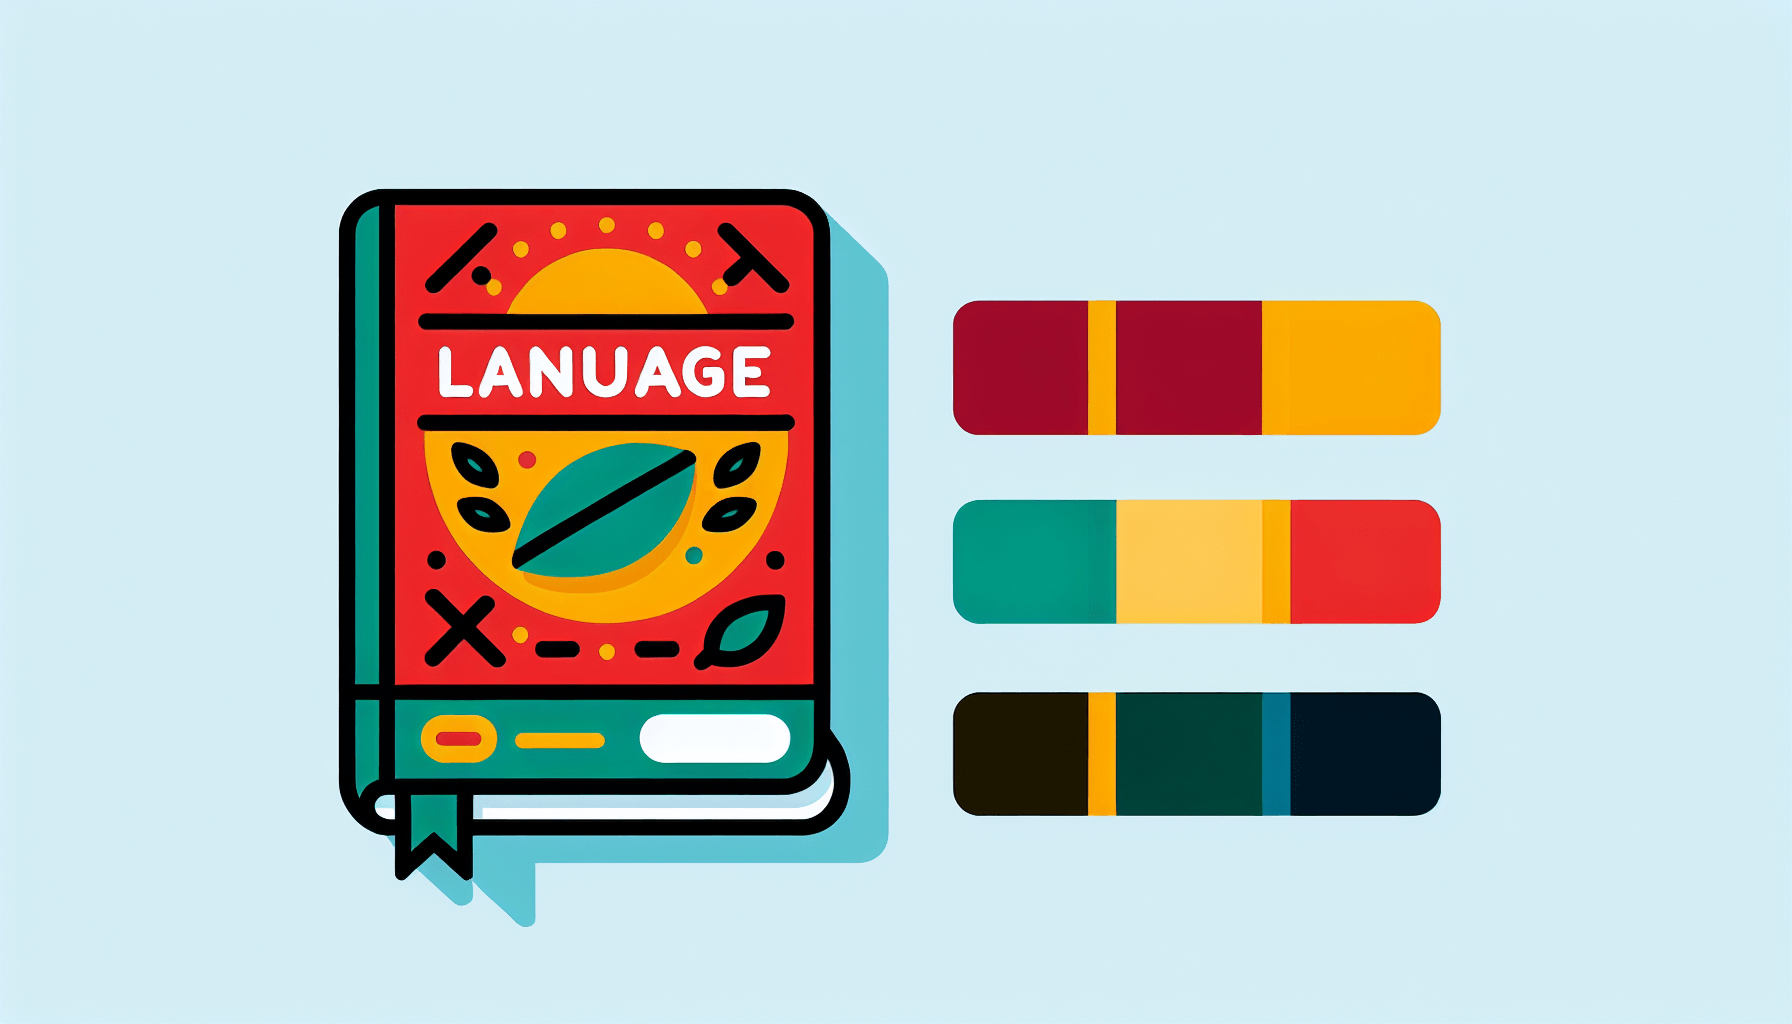 Language textbook in flat illustration style and white background, red #f47574, green #88c7a8, yellow #fcc44b, and blue #645bc8 colors.